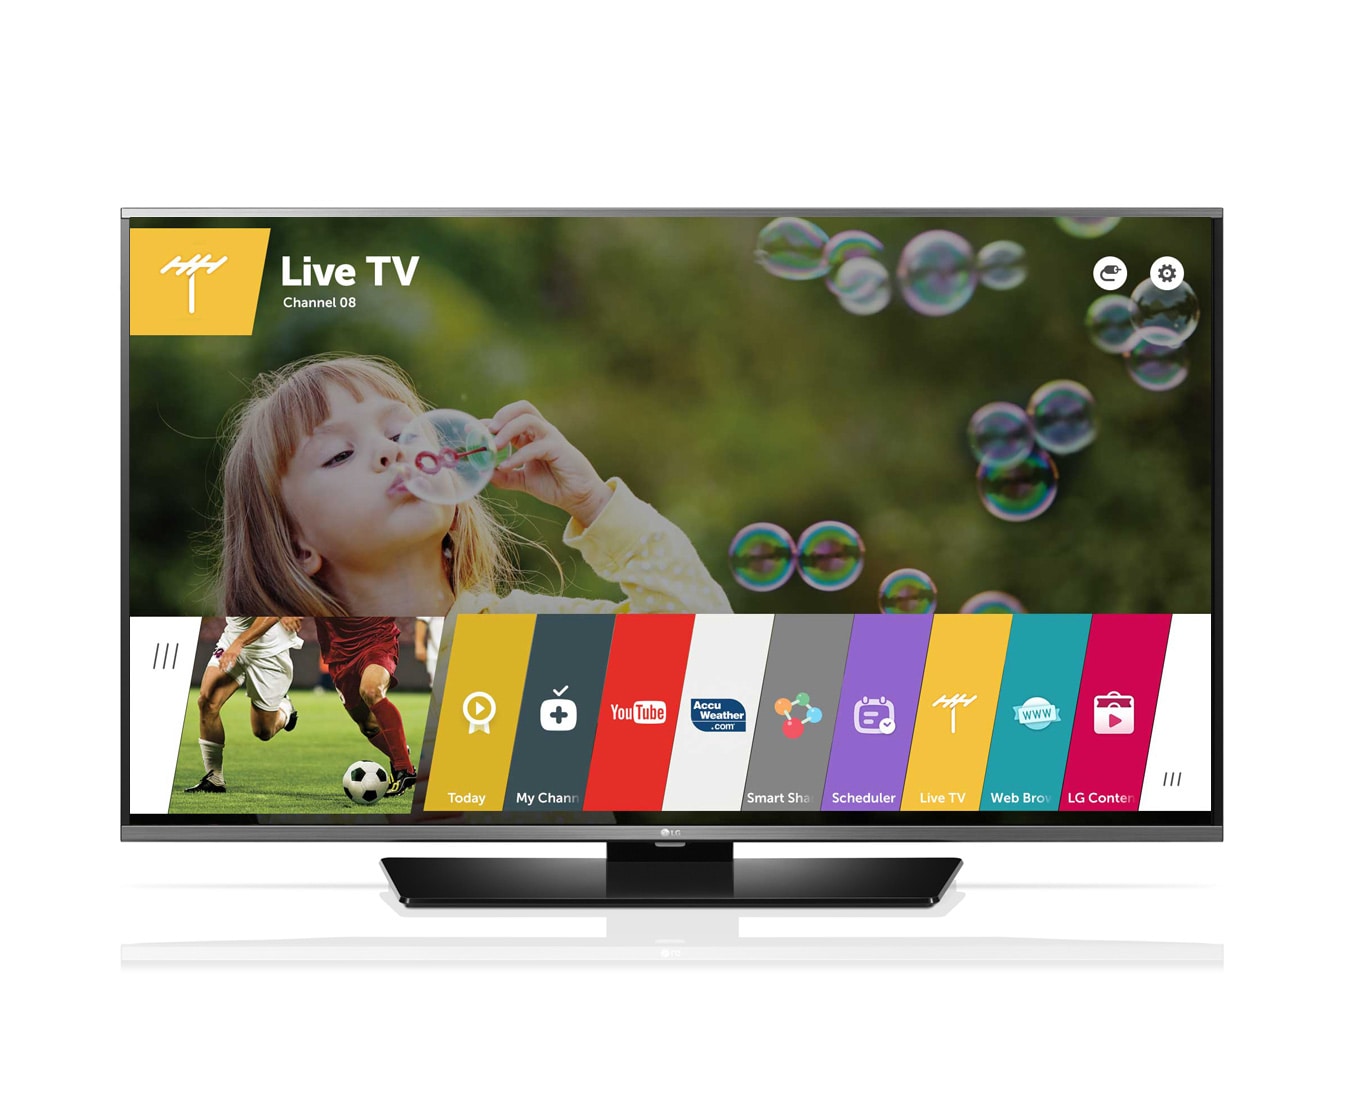 LG Smart TV with webOS 2.0, 32LF6300